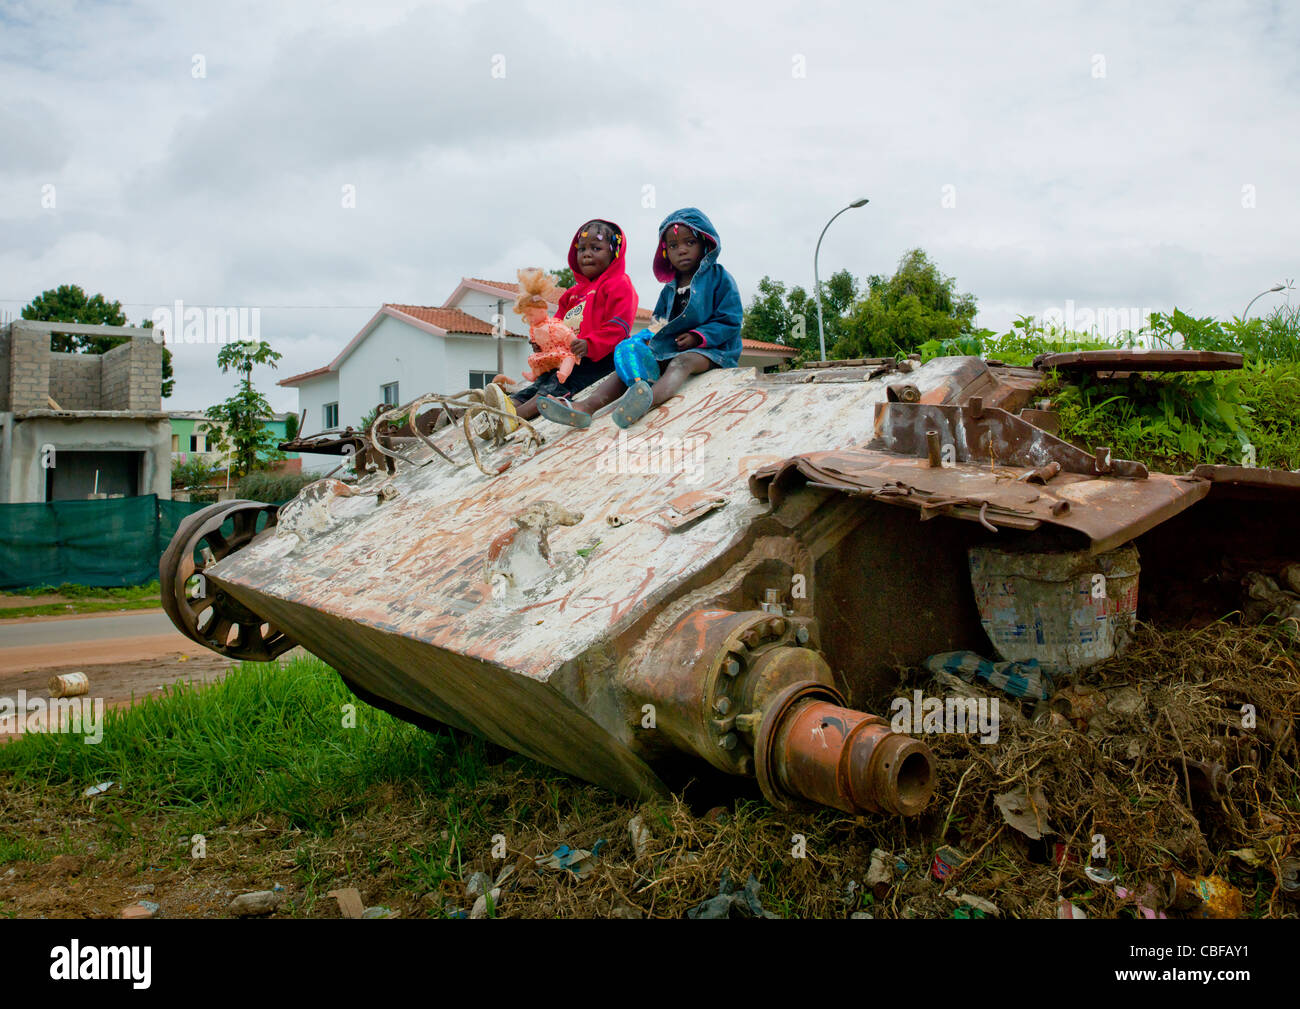 Kids On A Tank Wreck From Civil War, Angola Stock Photo